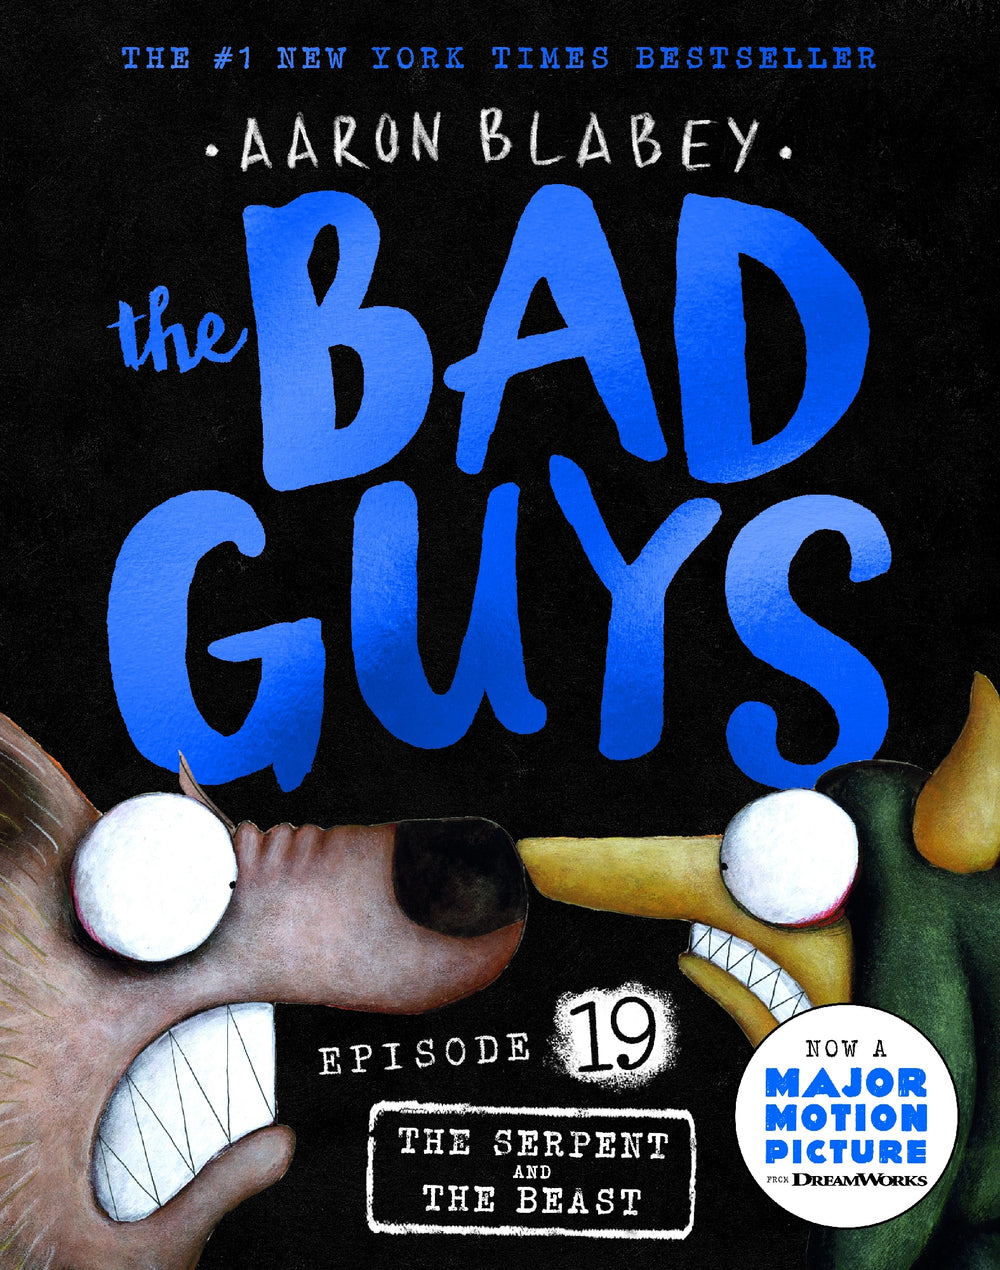 the Bad Guys:  Episode 19:  The Serpent and the Beast